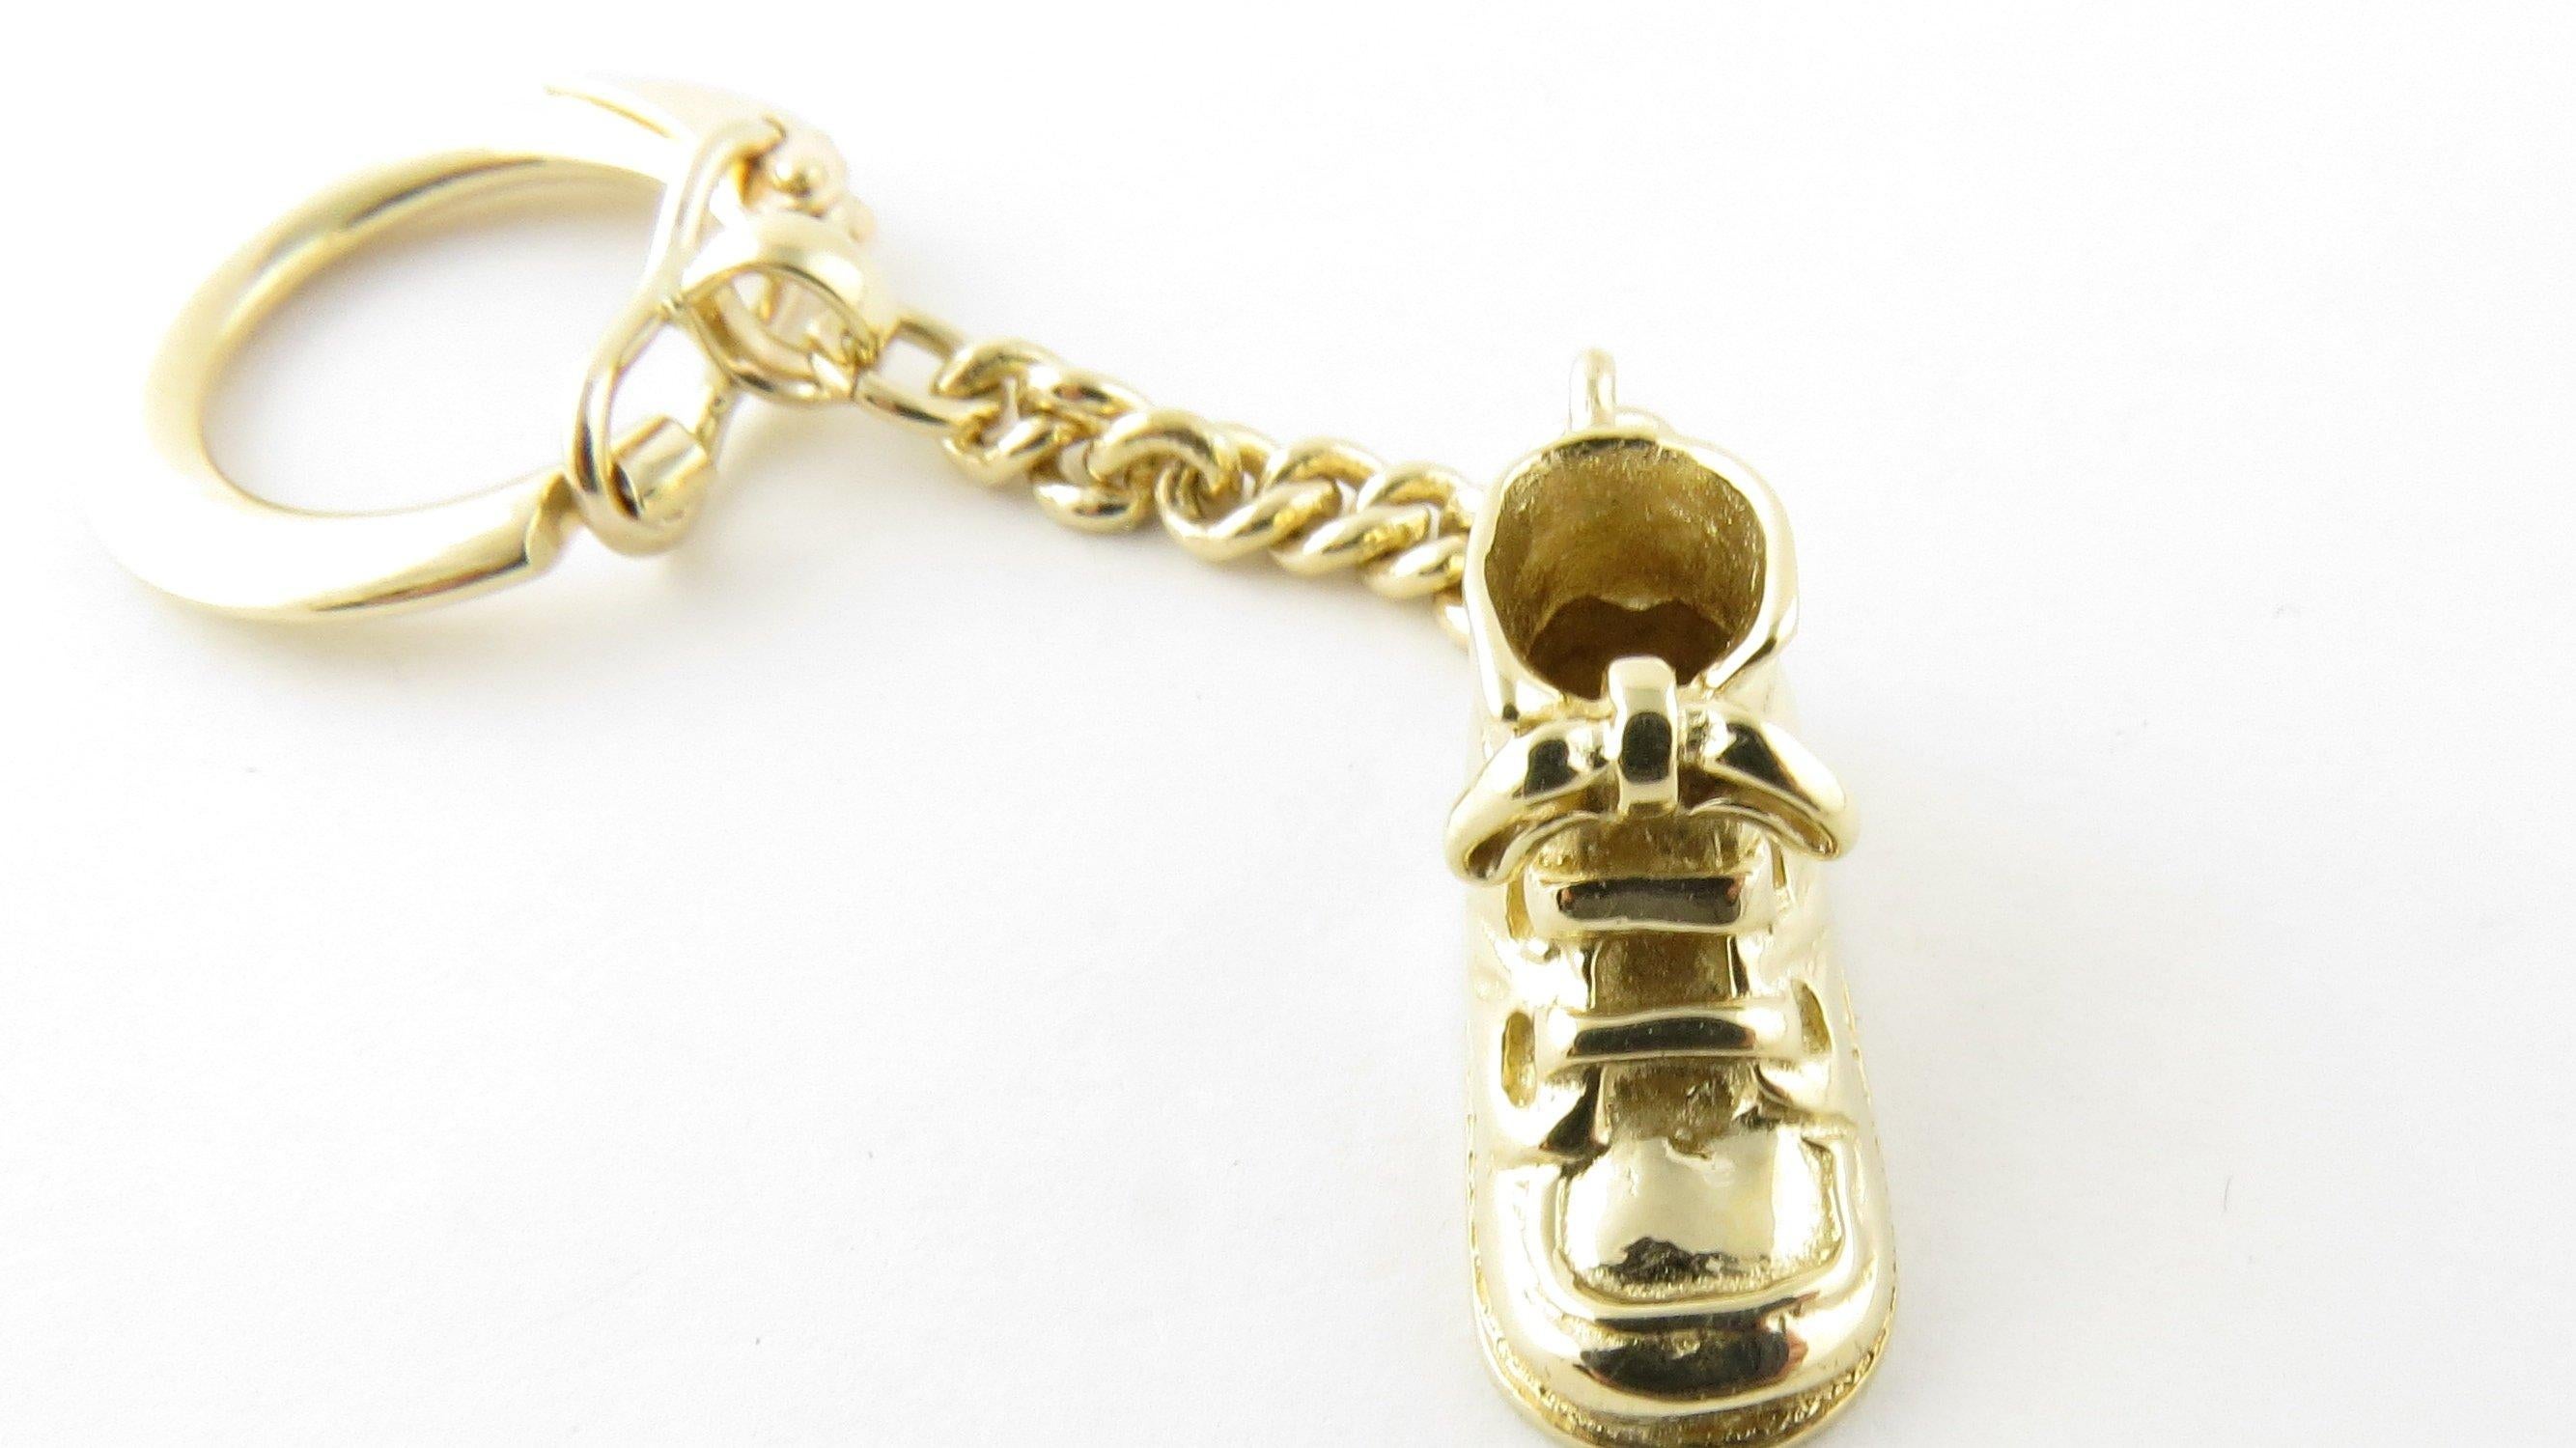 Vintage 14 Karat Yellow Gold Baby Shoe Keychain. This lovely keychain features a 3D baby shoe suspended from a classic 14K yellow gold key ring. Crafted in polished 14K yellow gold. Size: Key ring: 19 mm Baby shoe: 11 mm x 19 mm Chain: 33 mm Weight: